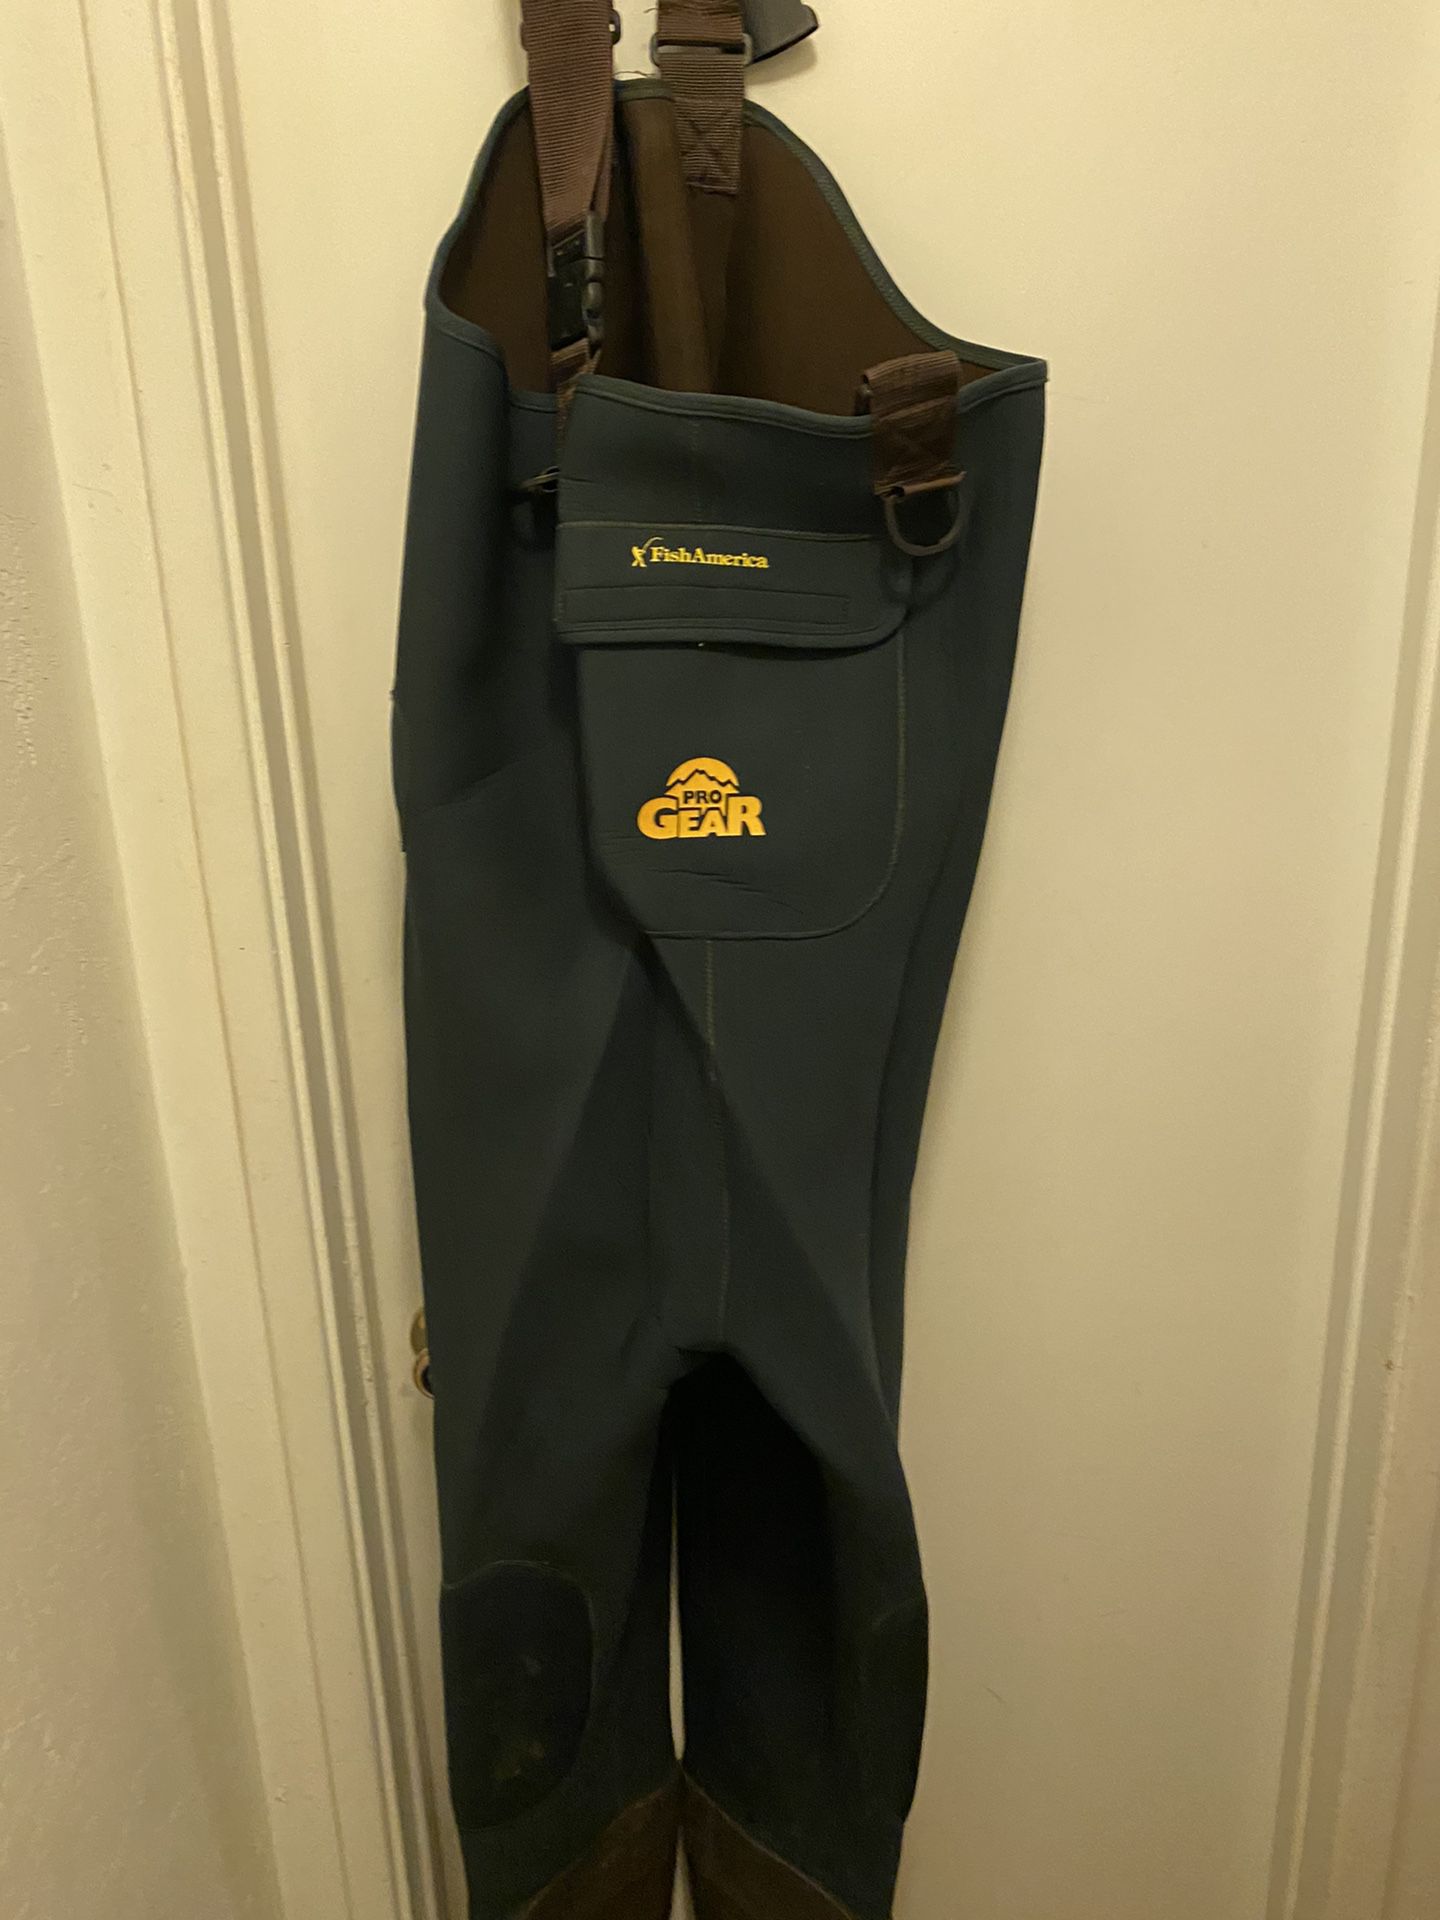 Size 12 fish america pro gear waders in great condition